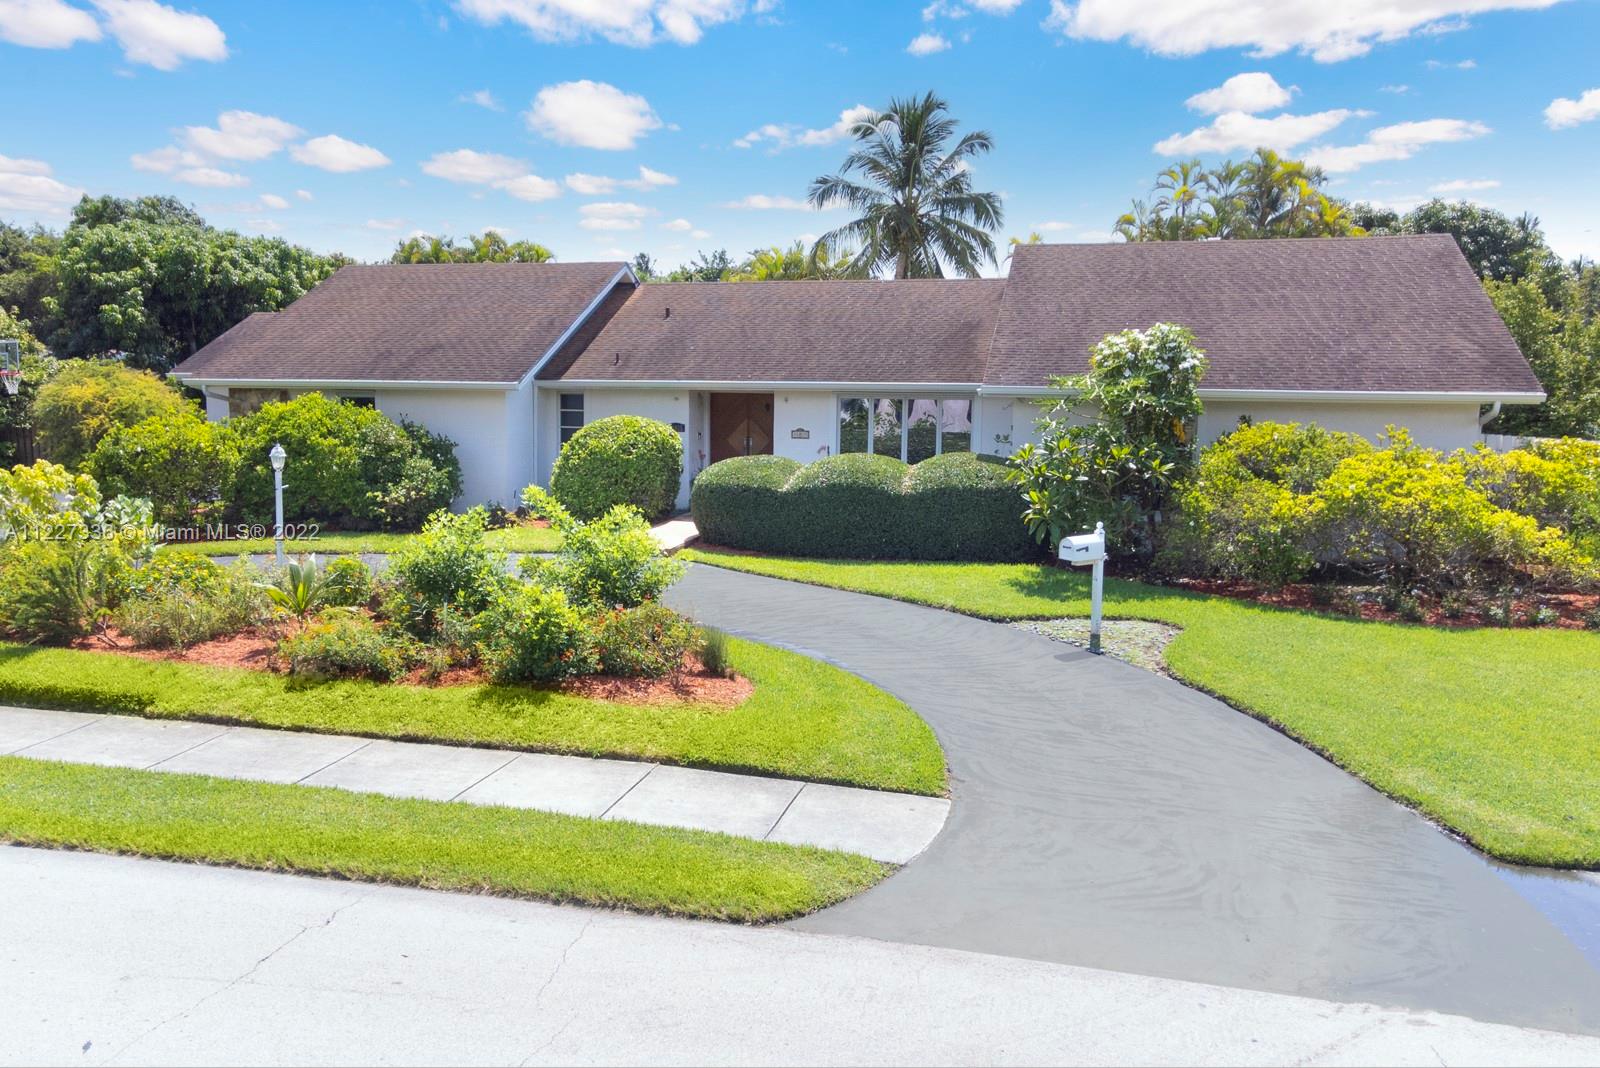 This is the one you have been waiting for.  Very well located LARGE Palmetto Bay home built in 1987 on corner lot.  6 Bedrooms plus a bonus room (office, gym, maid's room) 4.5 bths, high ceilings, 2 car garage. Marble floors, split bedroom plan, 4472 adj. sq.ft   Lush private lot with native wild garden filled with butterfly and hummingbird attractors & fruit trees (banana, mango, avocado, starfruit, papaya).  Open floor plan, indoor laundry room, and nice covered pool-patio are as well...HURRY!!!